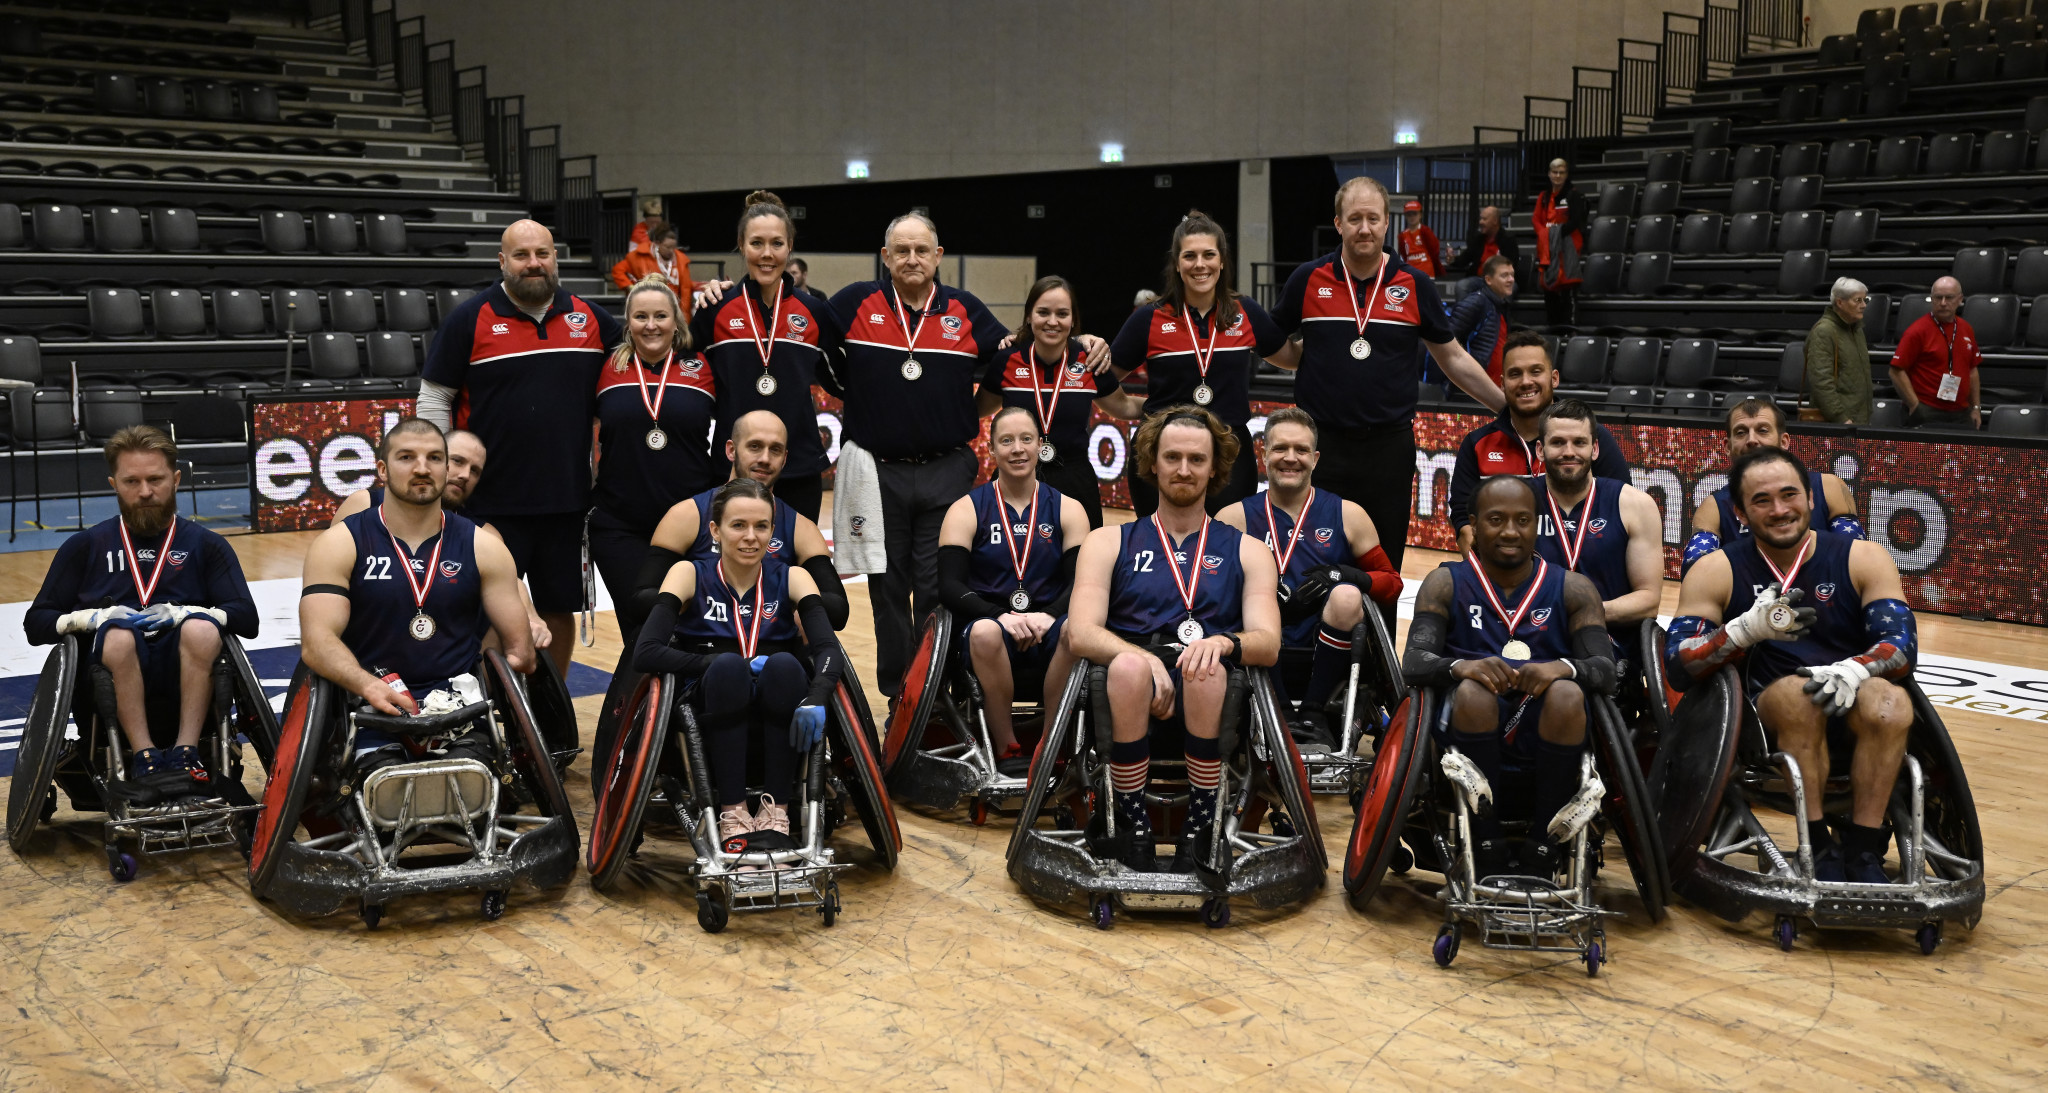 The United States are the runners-up after a close final match versus Australia ©Lars Møller/Parasport Denmark